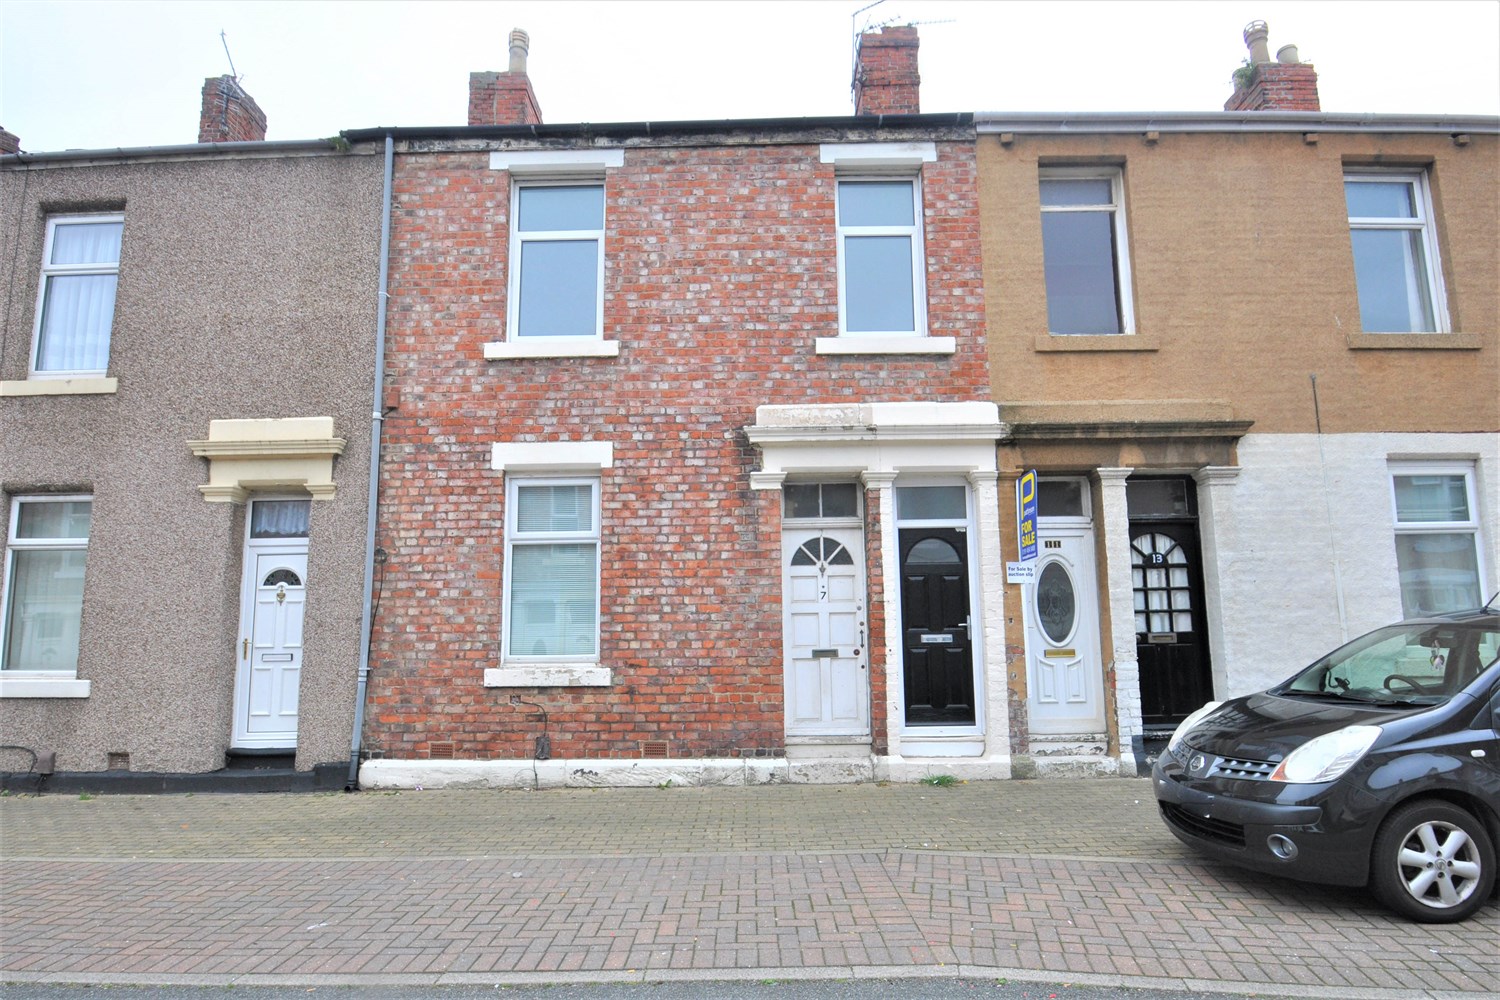 2 bed flat for sale in Dacre Street, South Shields - Property Image 1